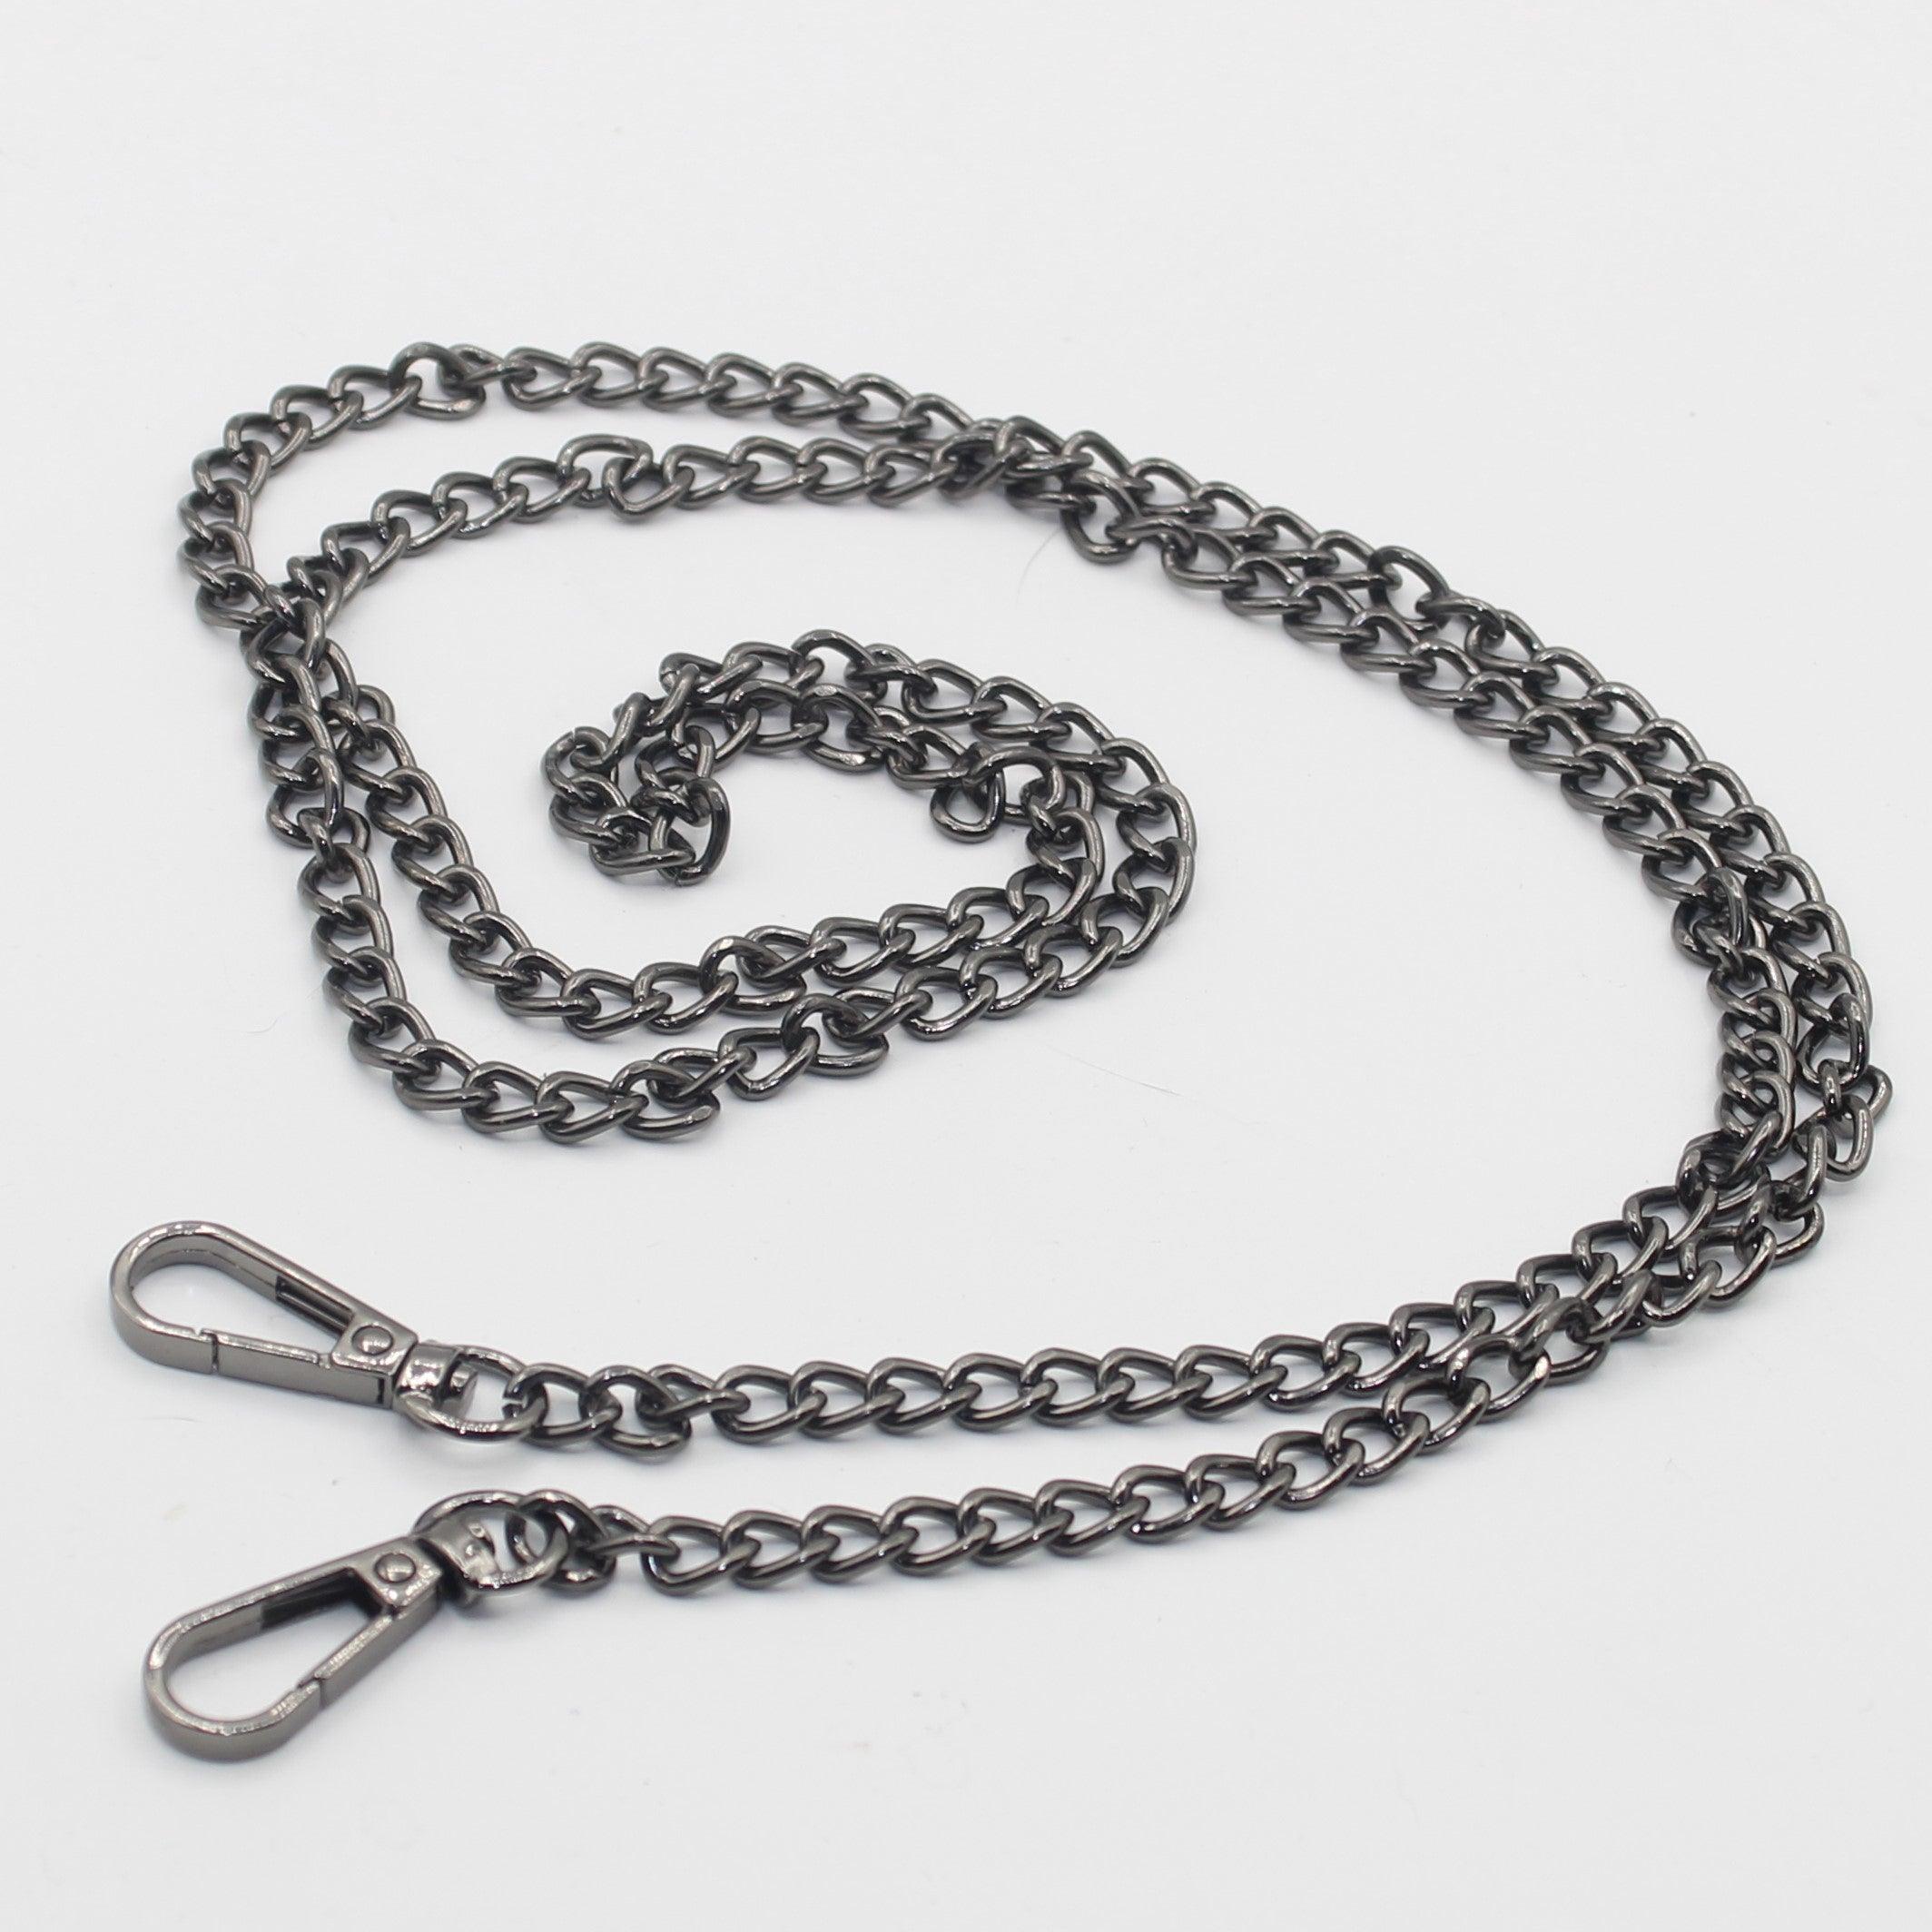 120cm long Chain with Lobsters (5mm rings) #CHAIN533